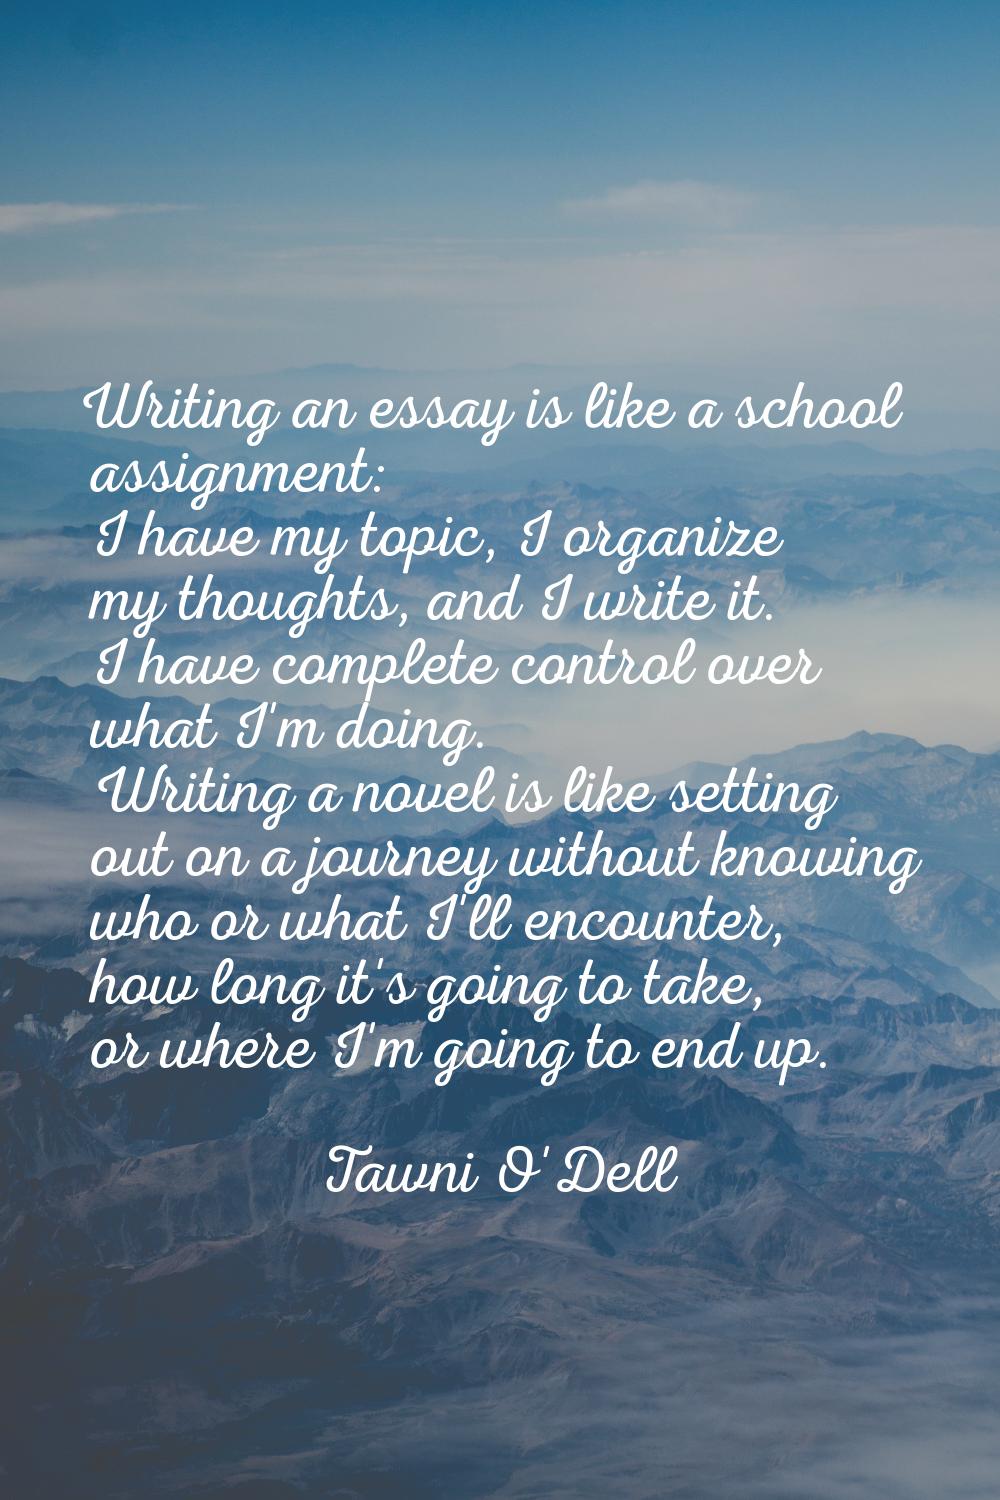 Writing an essay is like a school assignment: I have my topic, I organize my thoughts, and I write 